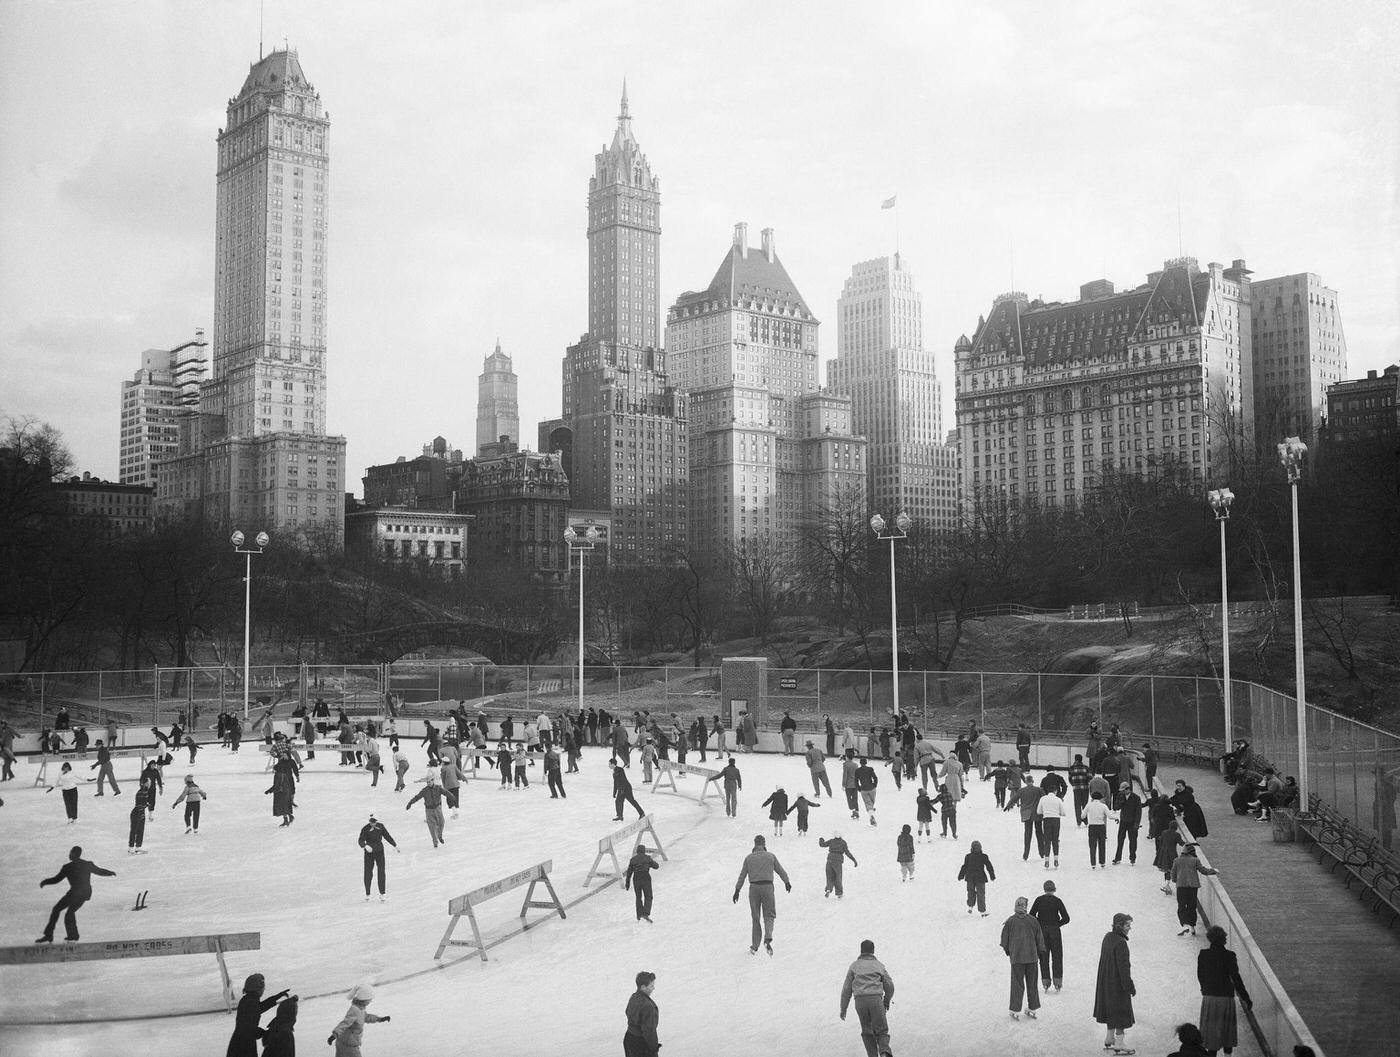 Skaters At The Wollman Rink In Central Park, Manhattan, 1951